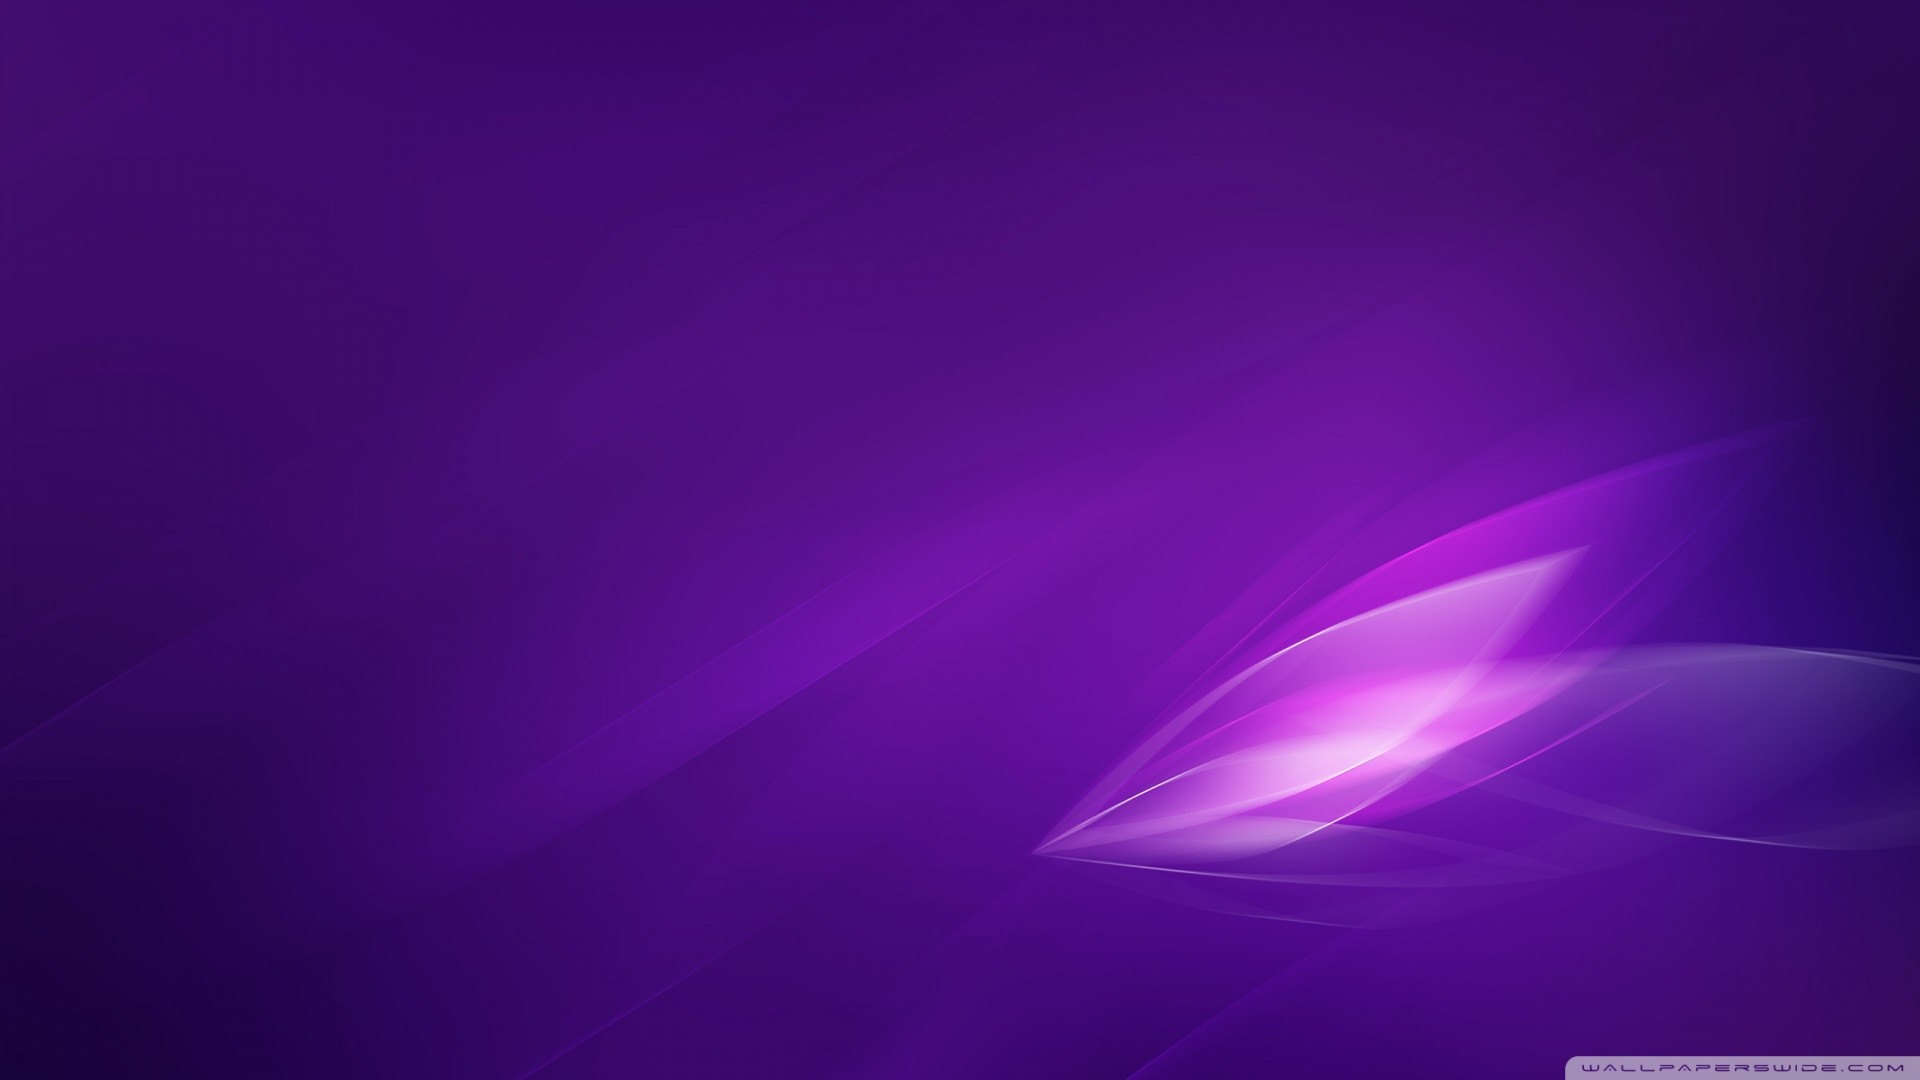 1920x1080 Colors images Purple Wallpaper HD wallpaper and background photos